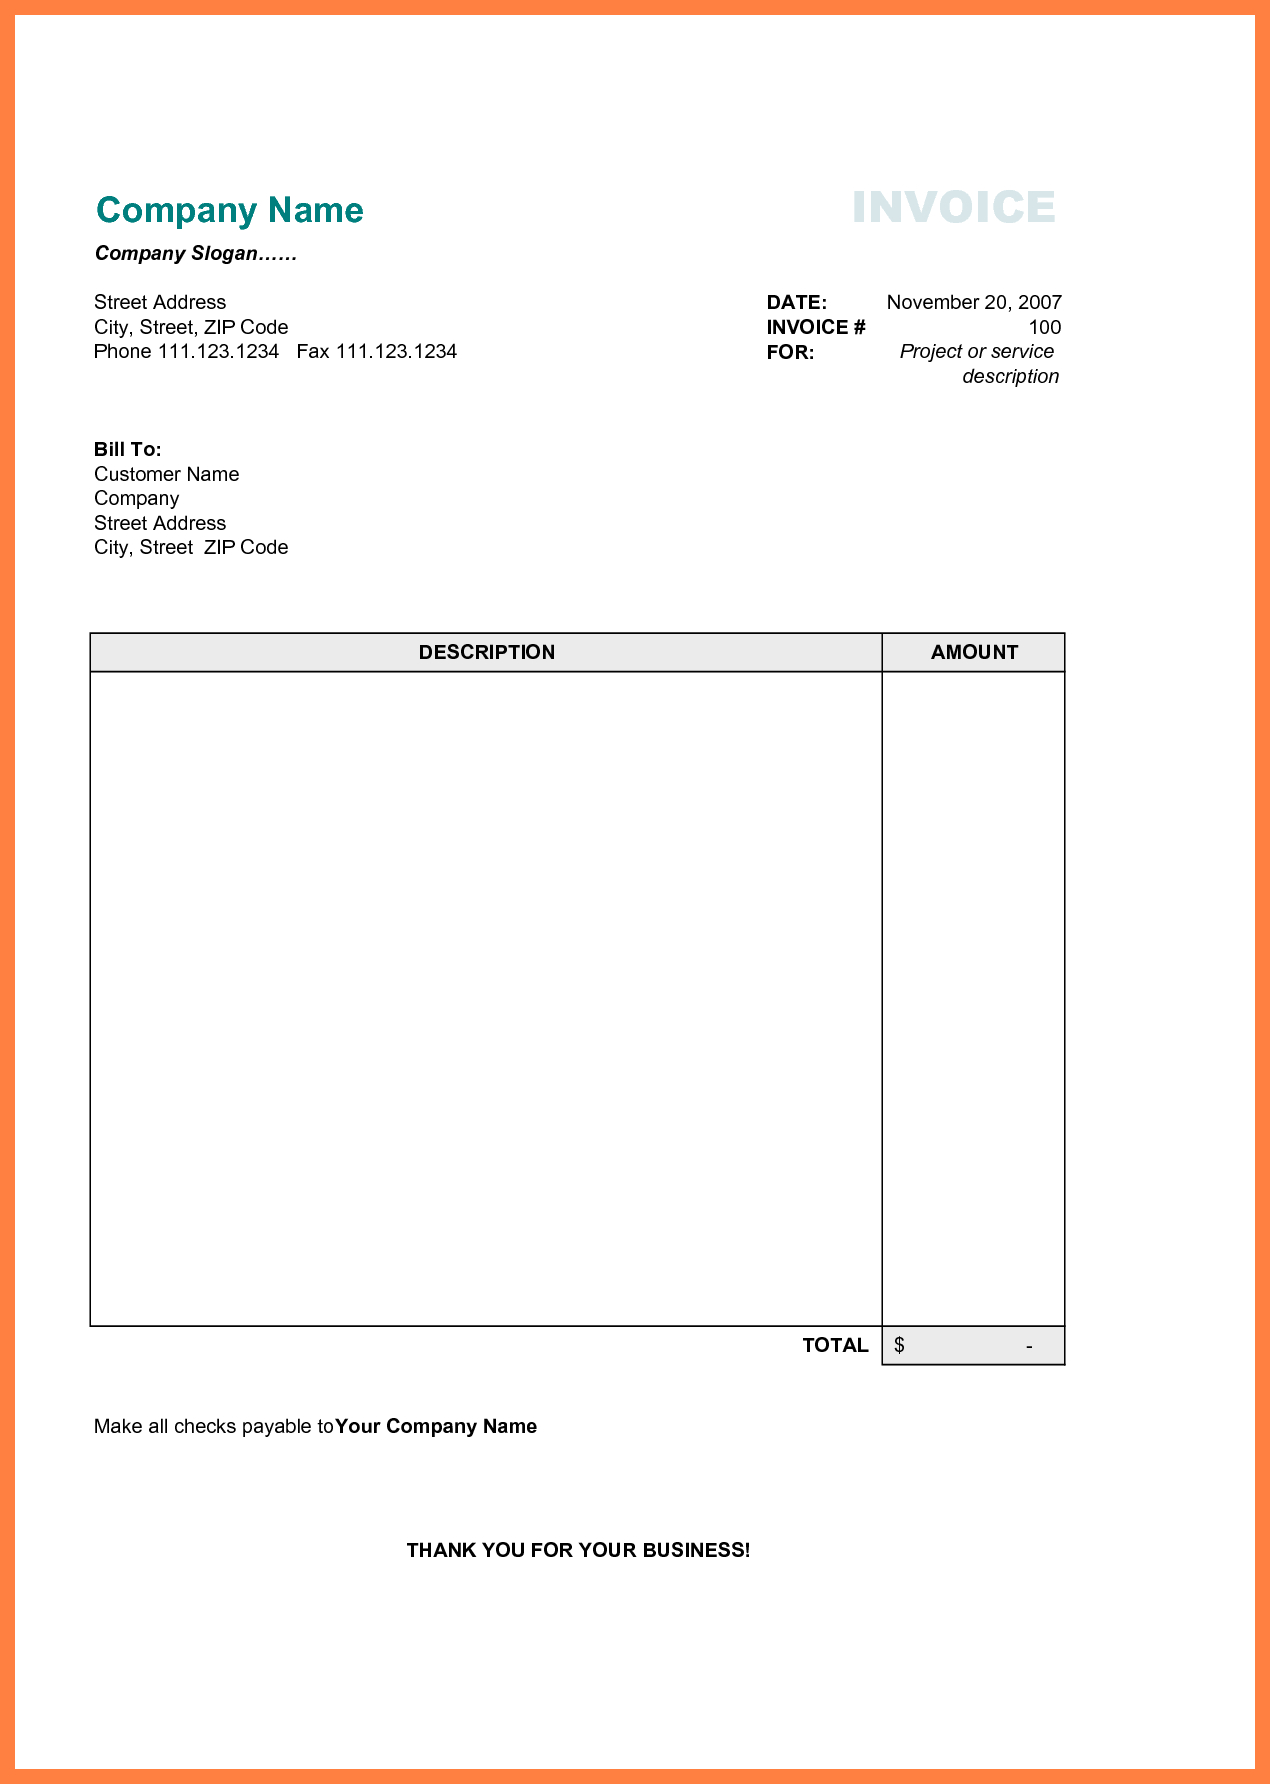 Free Printable Business Invoice Template - Invoice Format In Excel - Free Printable Business Forms